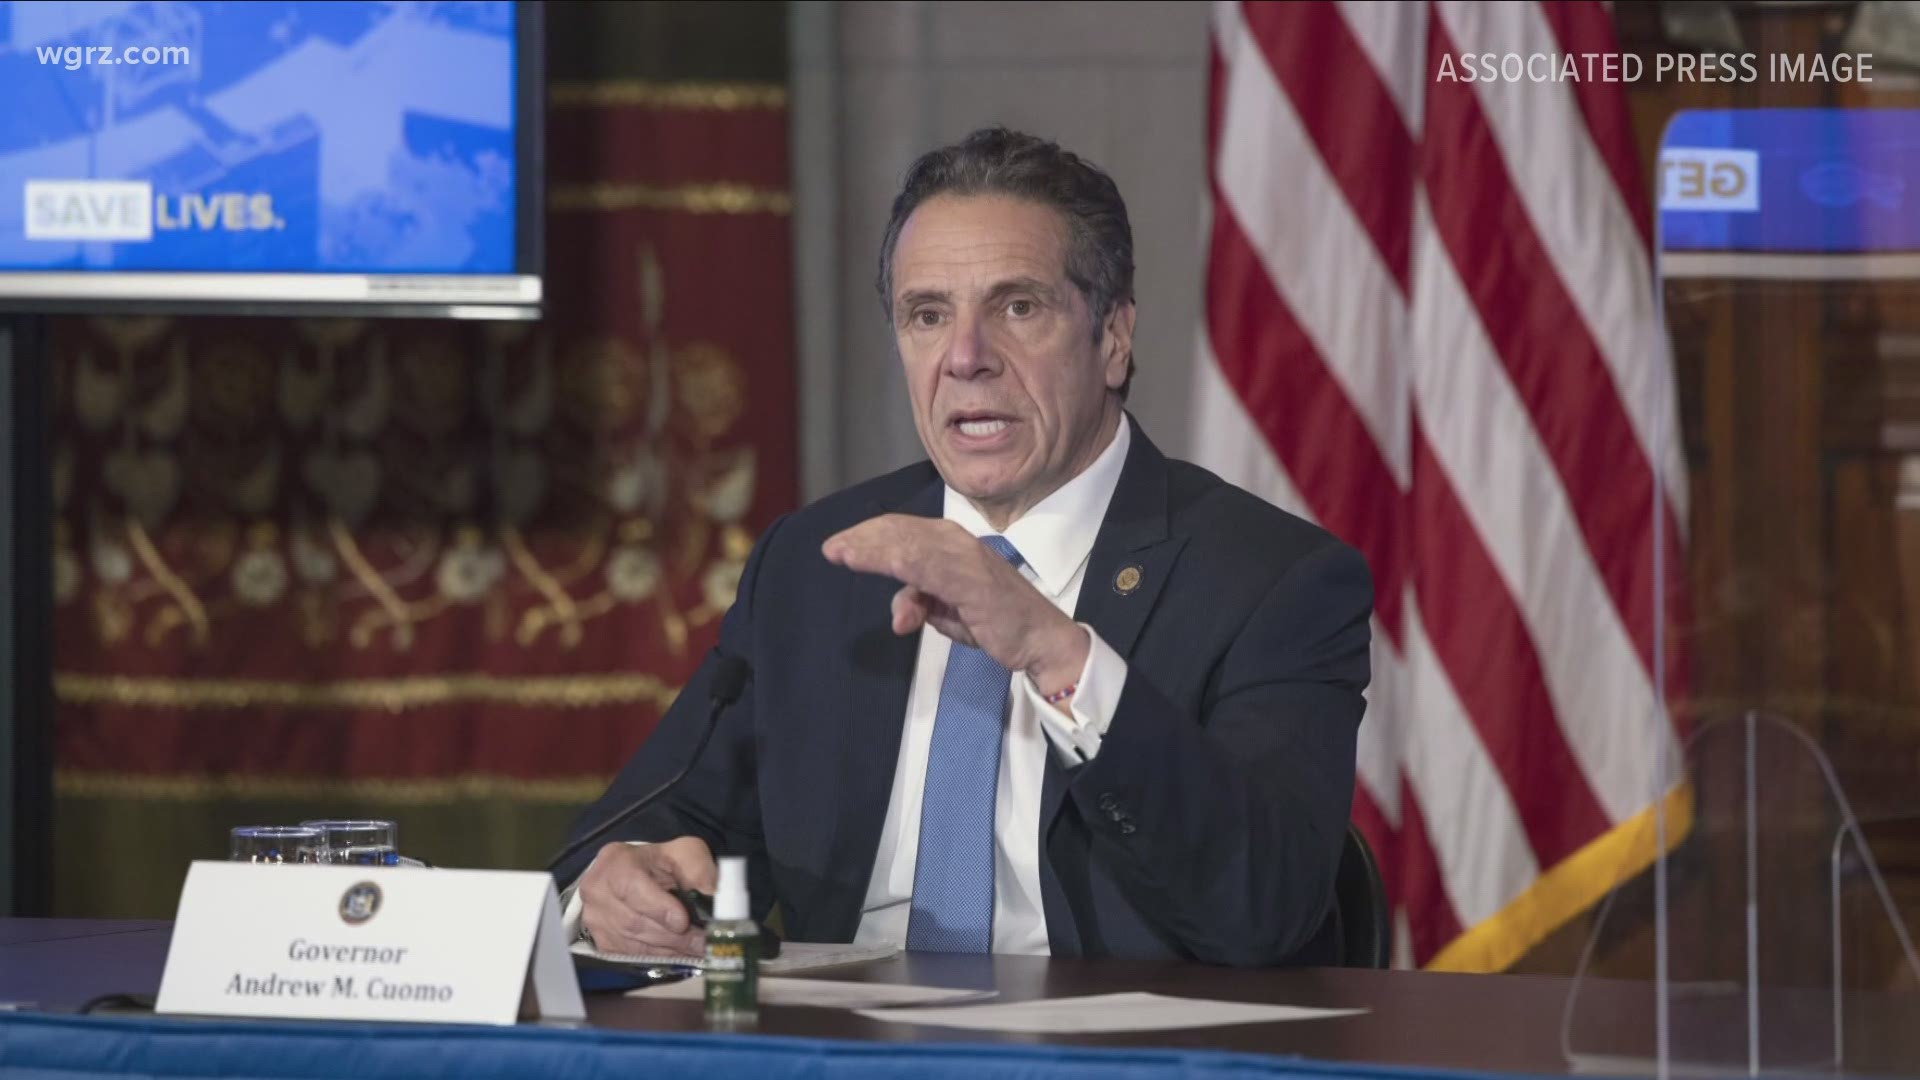 Every hour that investigators probe the sexual harassment and misconduct claims against Governor Andrew Cuomo, that's more money taken from you the taxpayer.